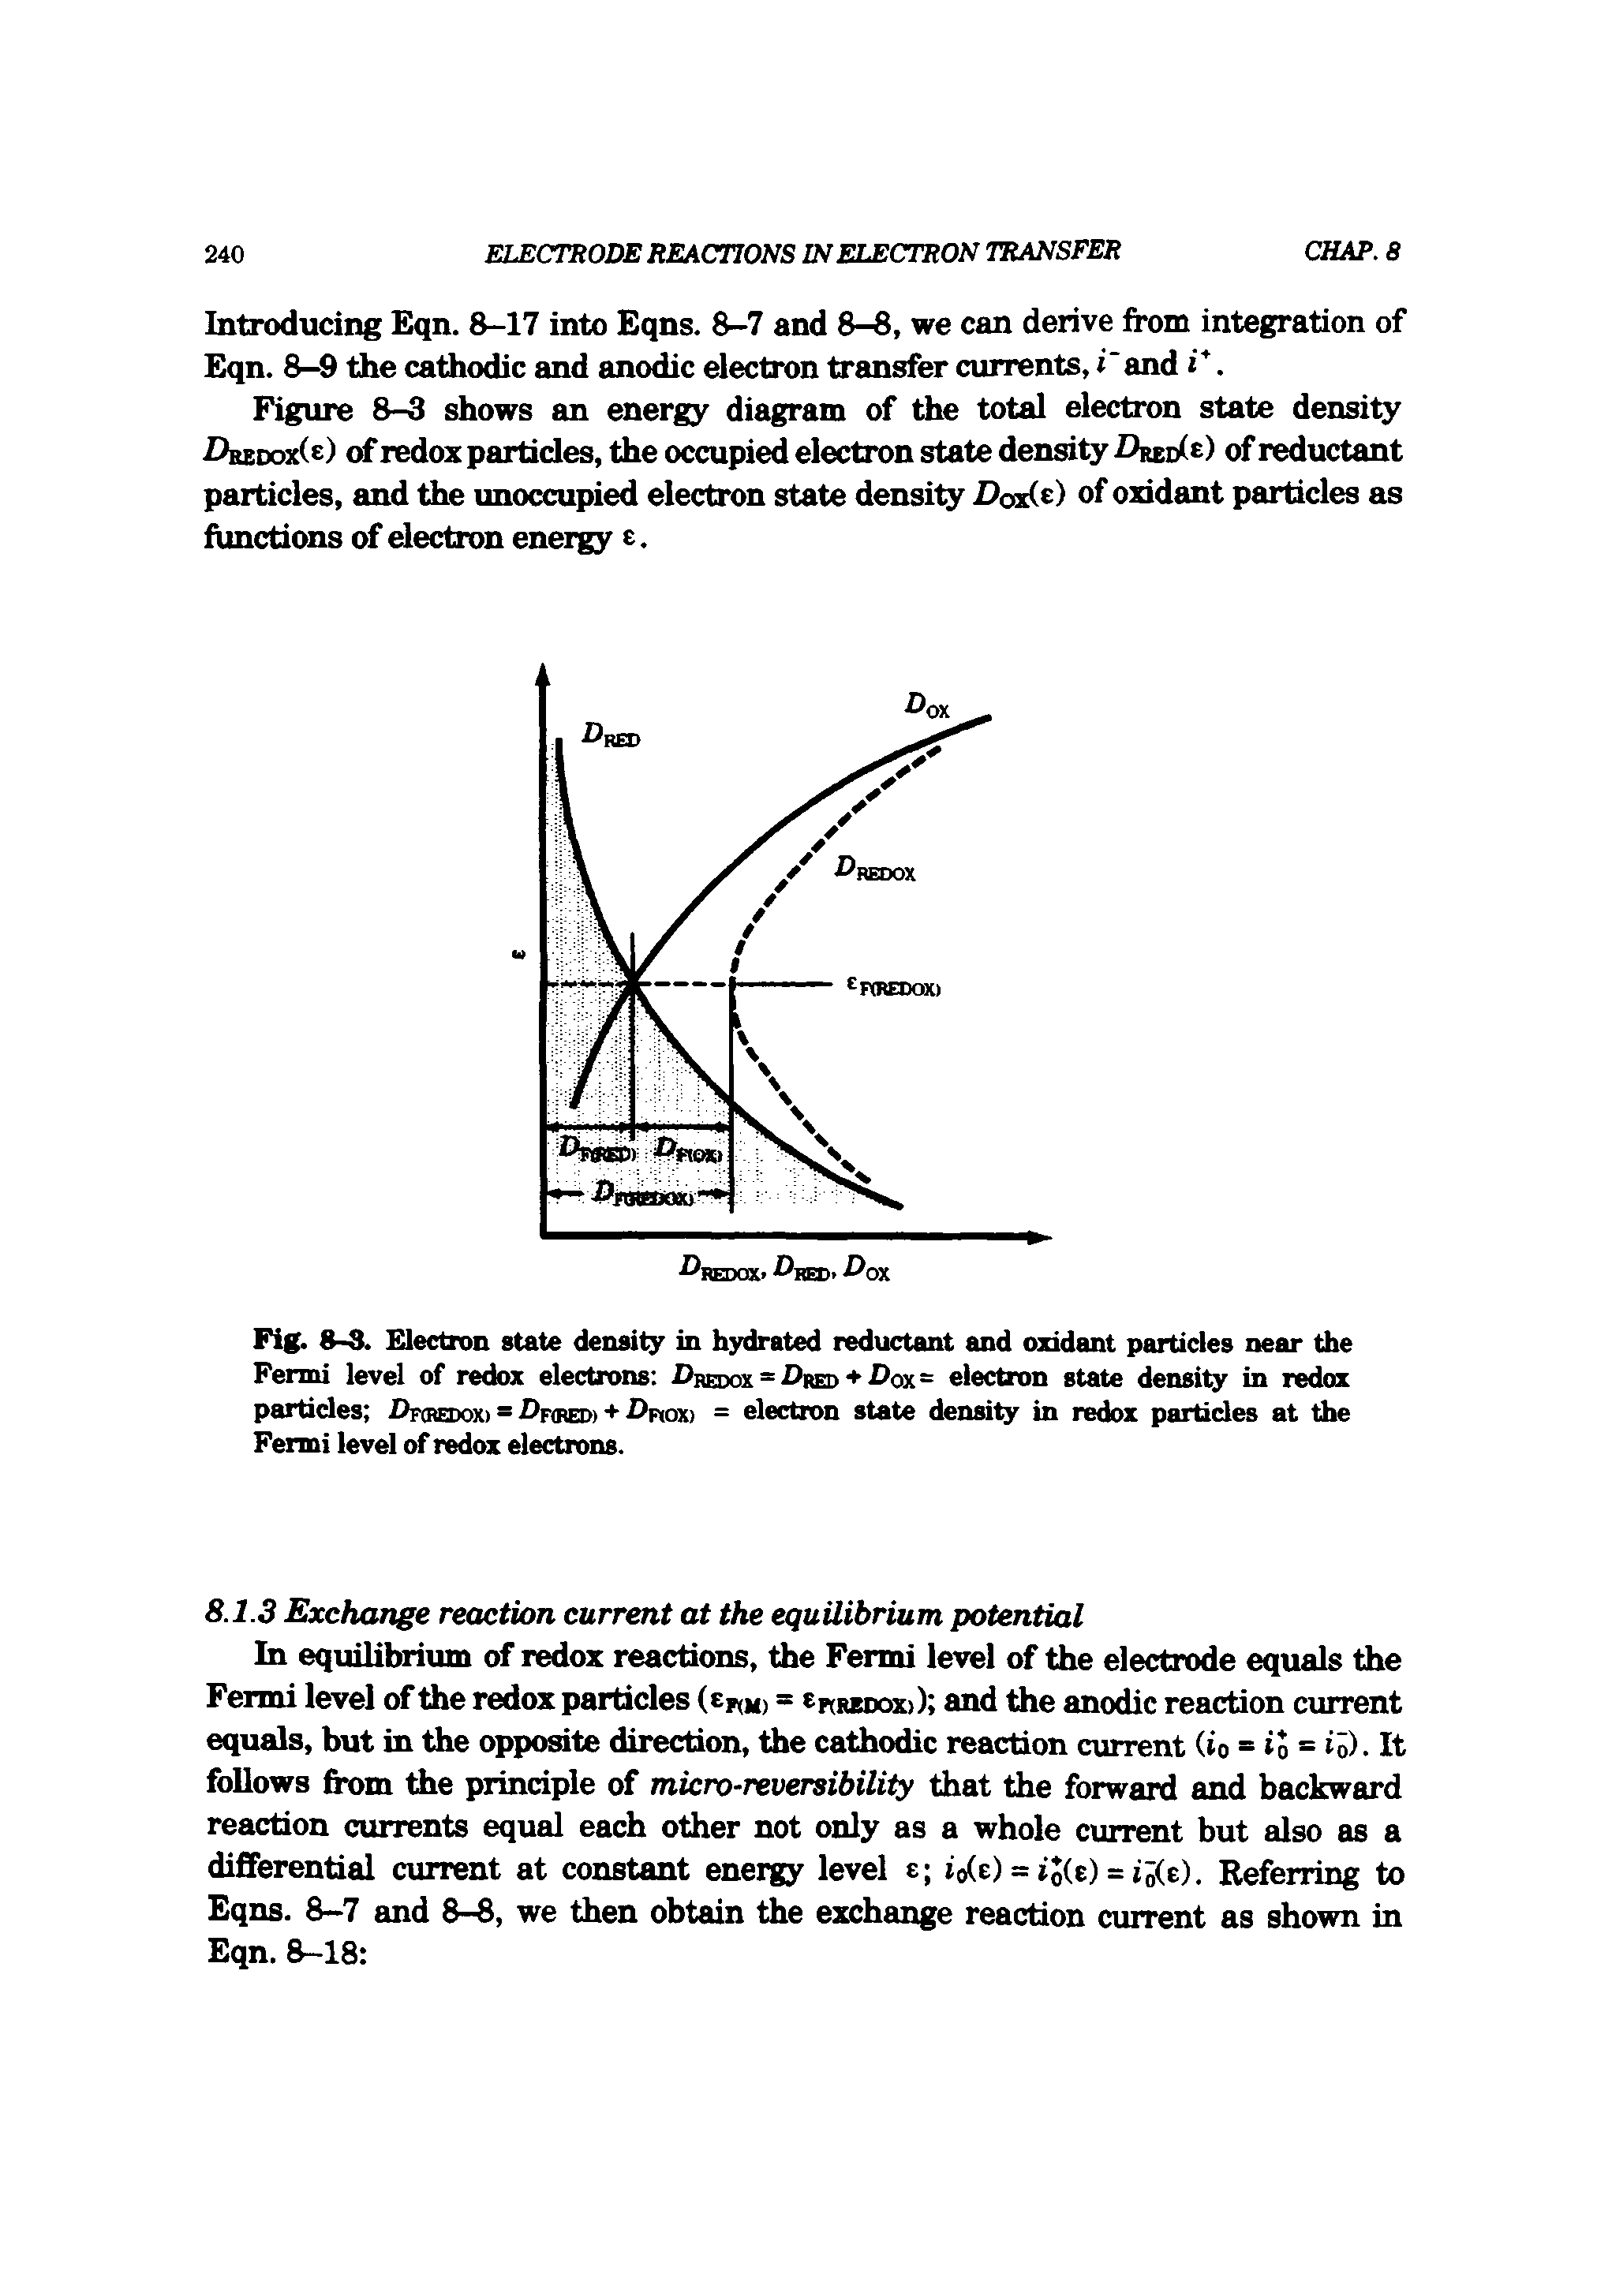 Fig. 8-3. Electron state density in hydrated reductant and oxidant particles near the Fermi level of redox electrons I>redox = 1)red -I>ox= electron state density in redox particles Dpcredox) 1)f(bed)l nox) = electron state density in redox particles at the Fermi level of redox electrons.